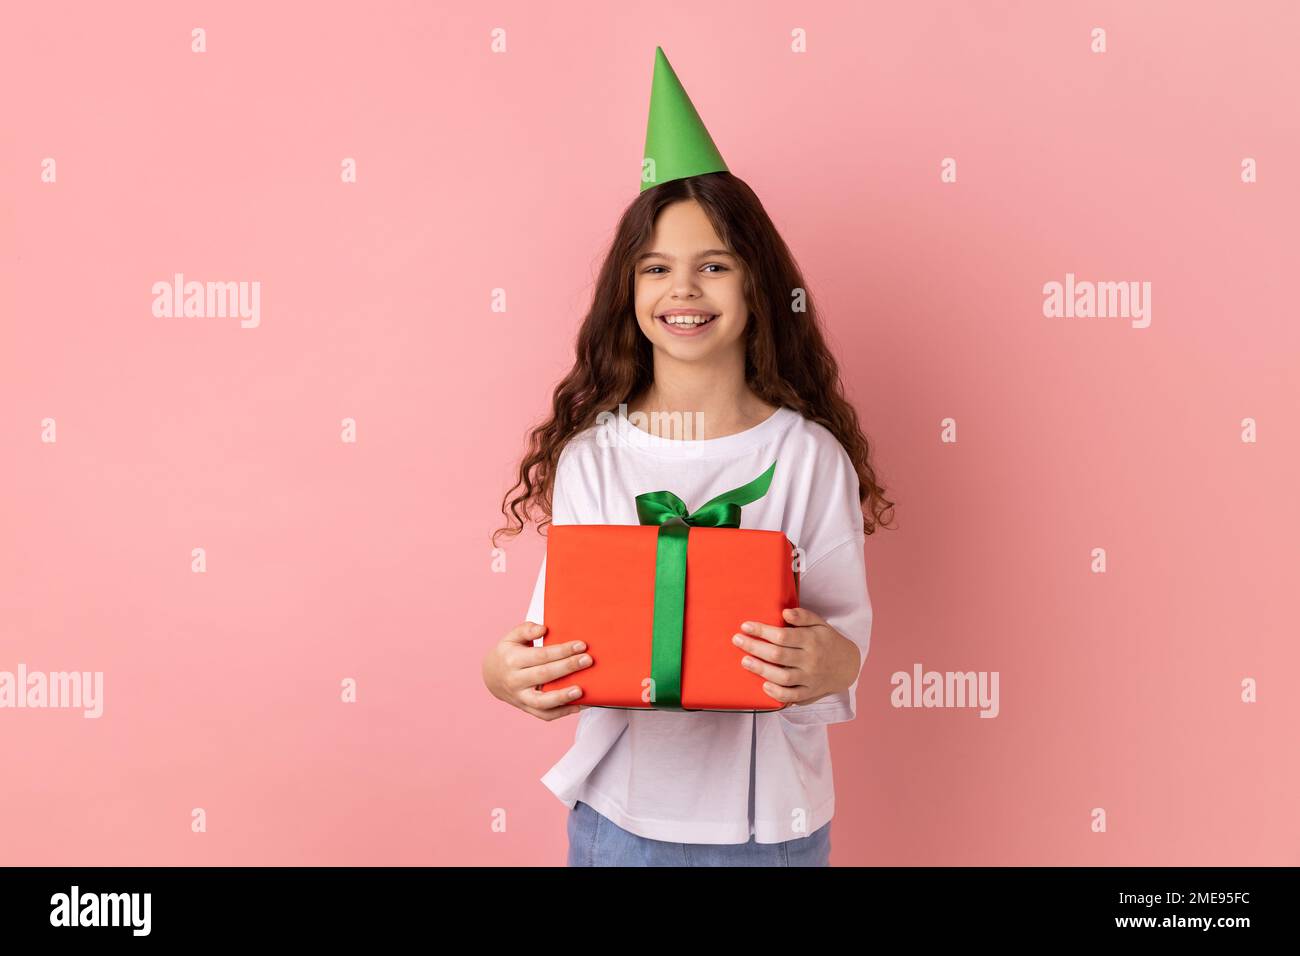 Portrait of little girl wearing white T-shirt and party cone holding red wrapped gift box, looking at camera with satisfied expression. Indoor studio shot isolated on pink background. Stock Photo